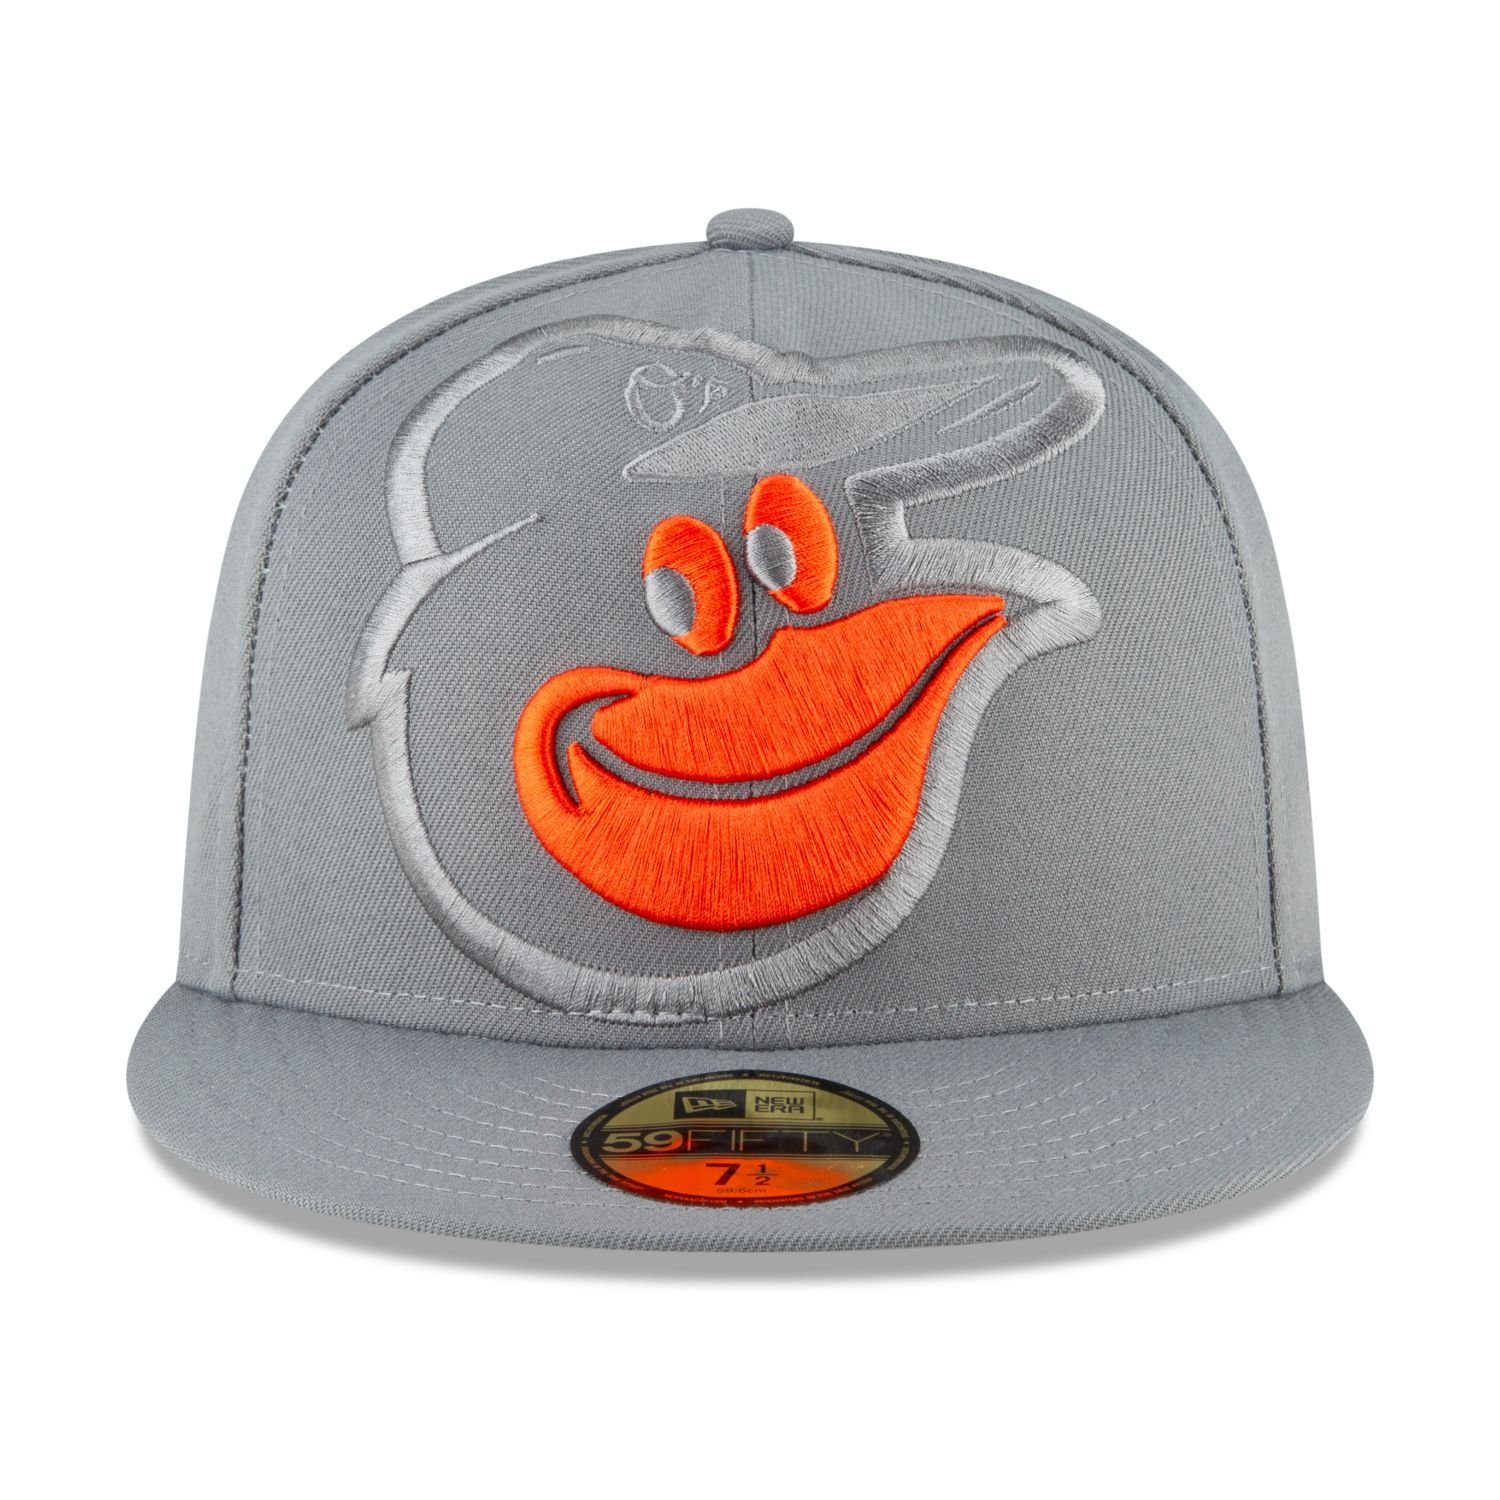 Team Cap Fitted MLB Orioles 59Fifty STORM Baltimore Cooperstown Era GREY New